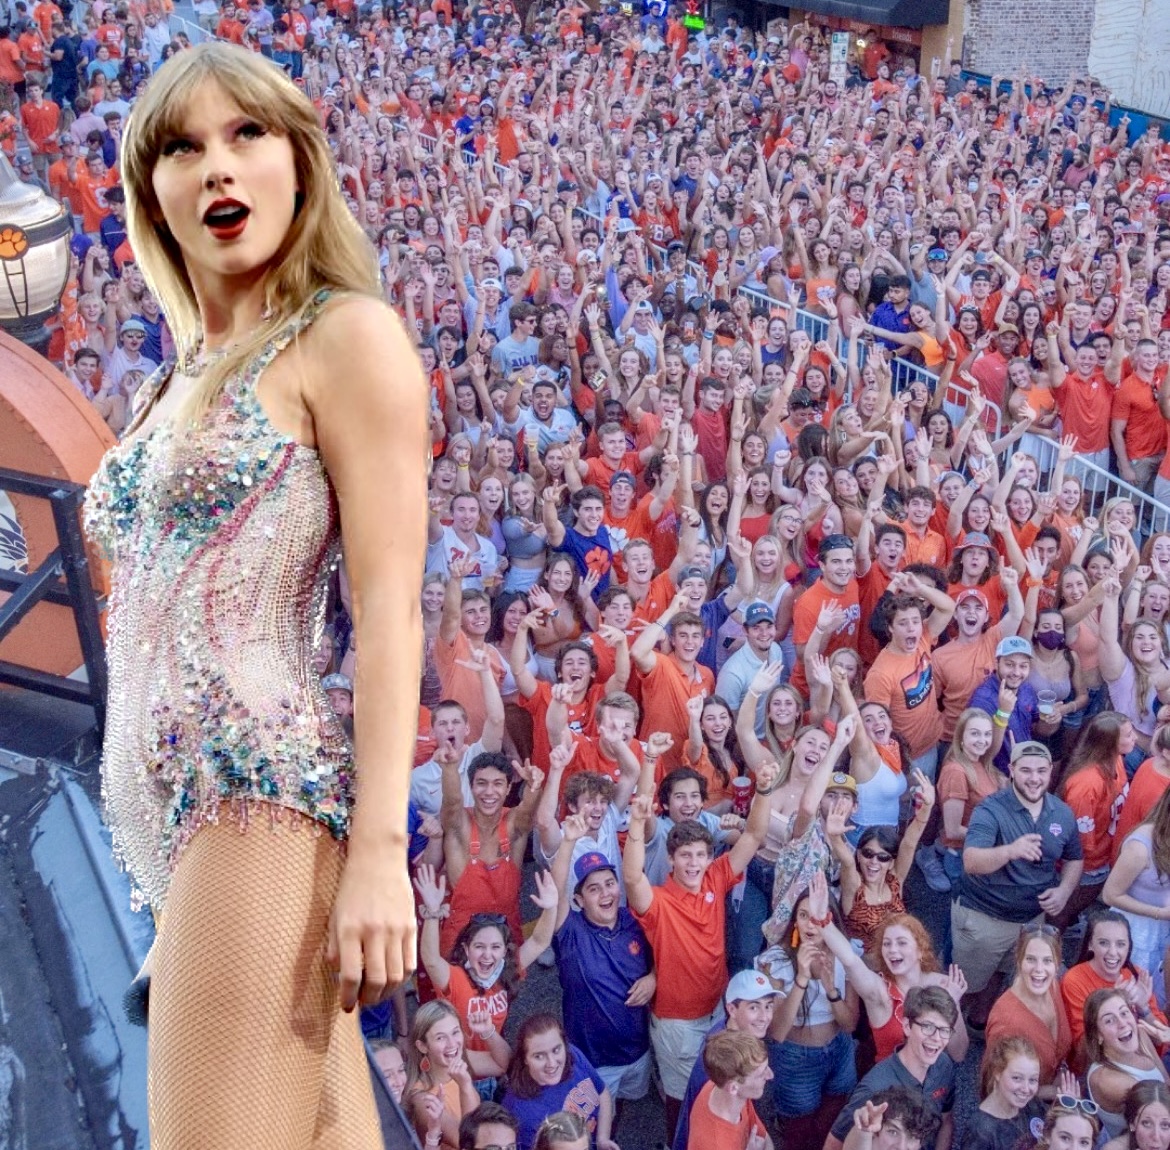 Swifties, get ready for your supreme leader to come to Clemson to perform. 